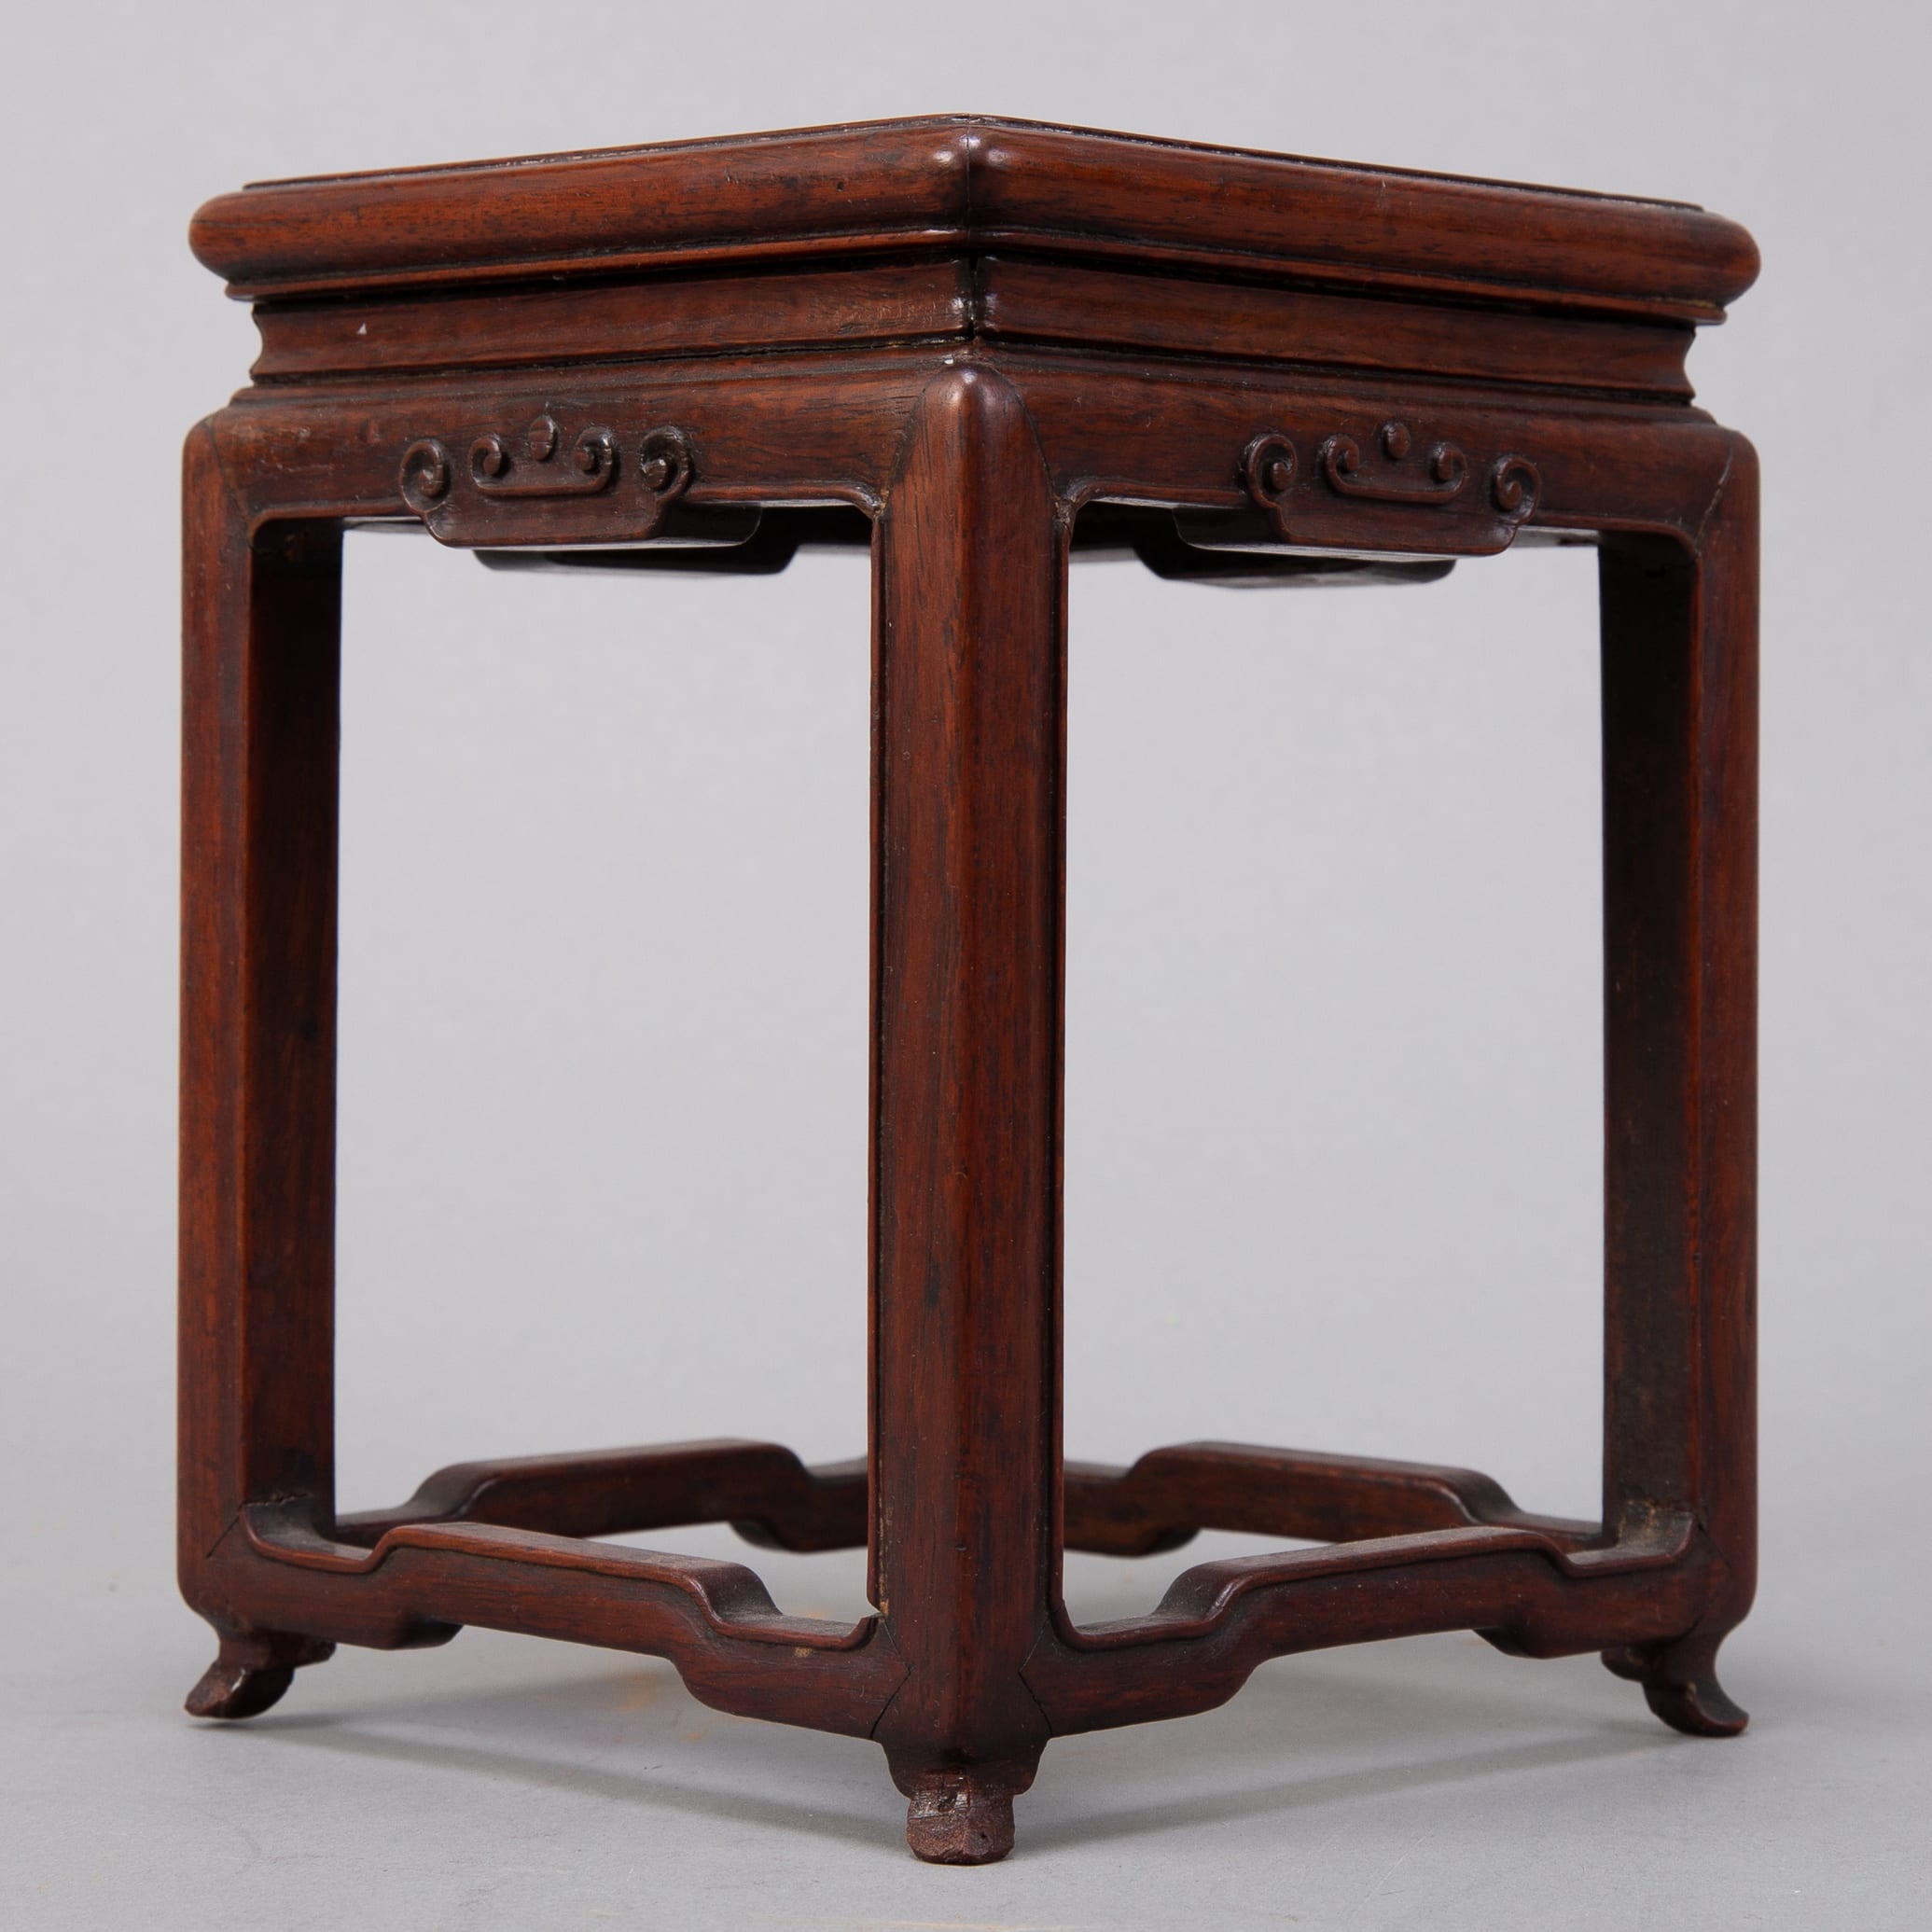 Lot 281: Square Chinese Hardwood Stand for vase or jade